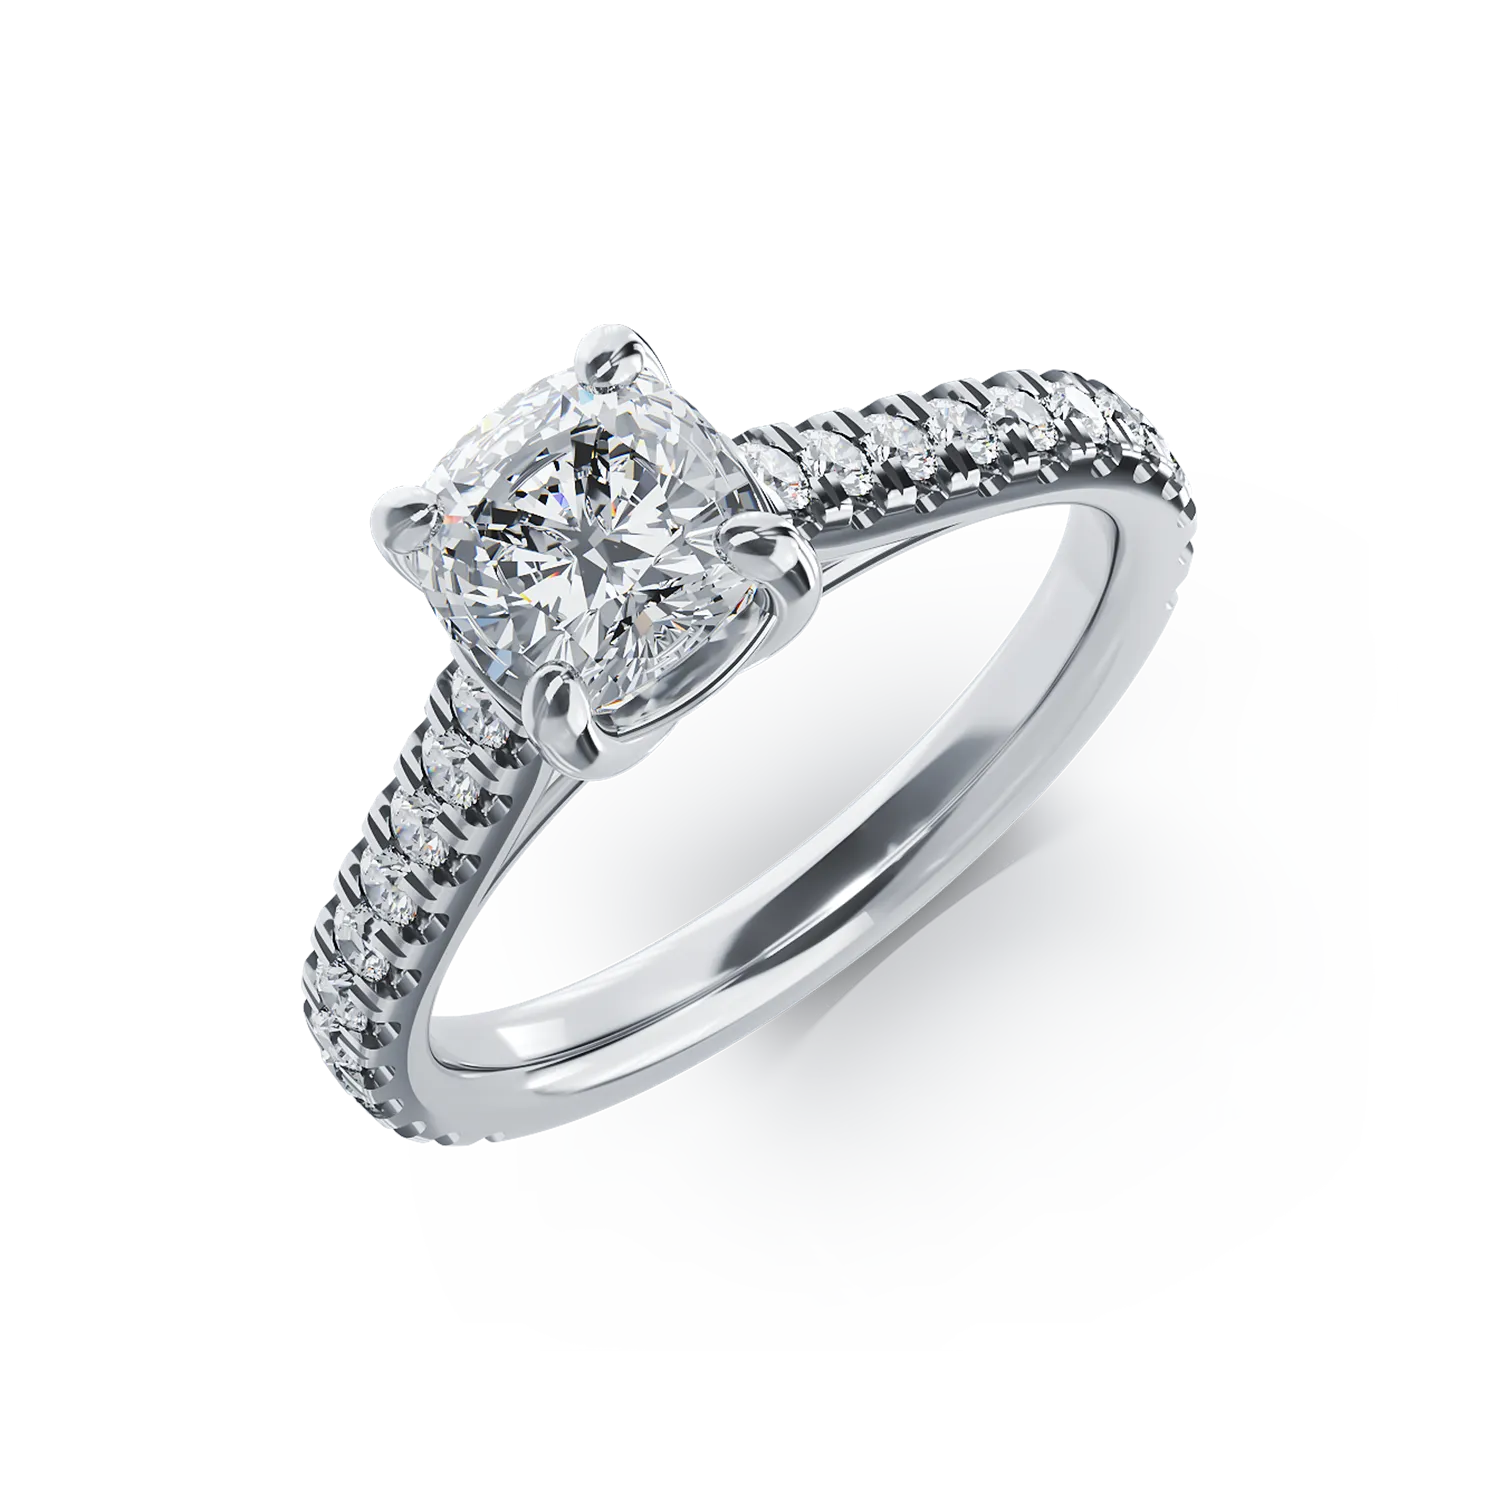 18K white gold engagement ring with 1.2ct diamond and 0.375ct diamonds